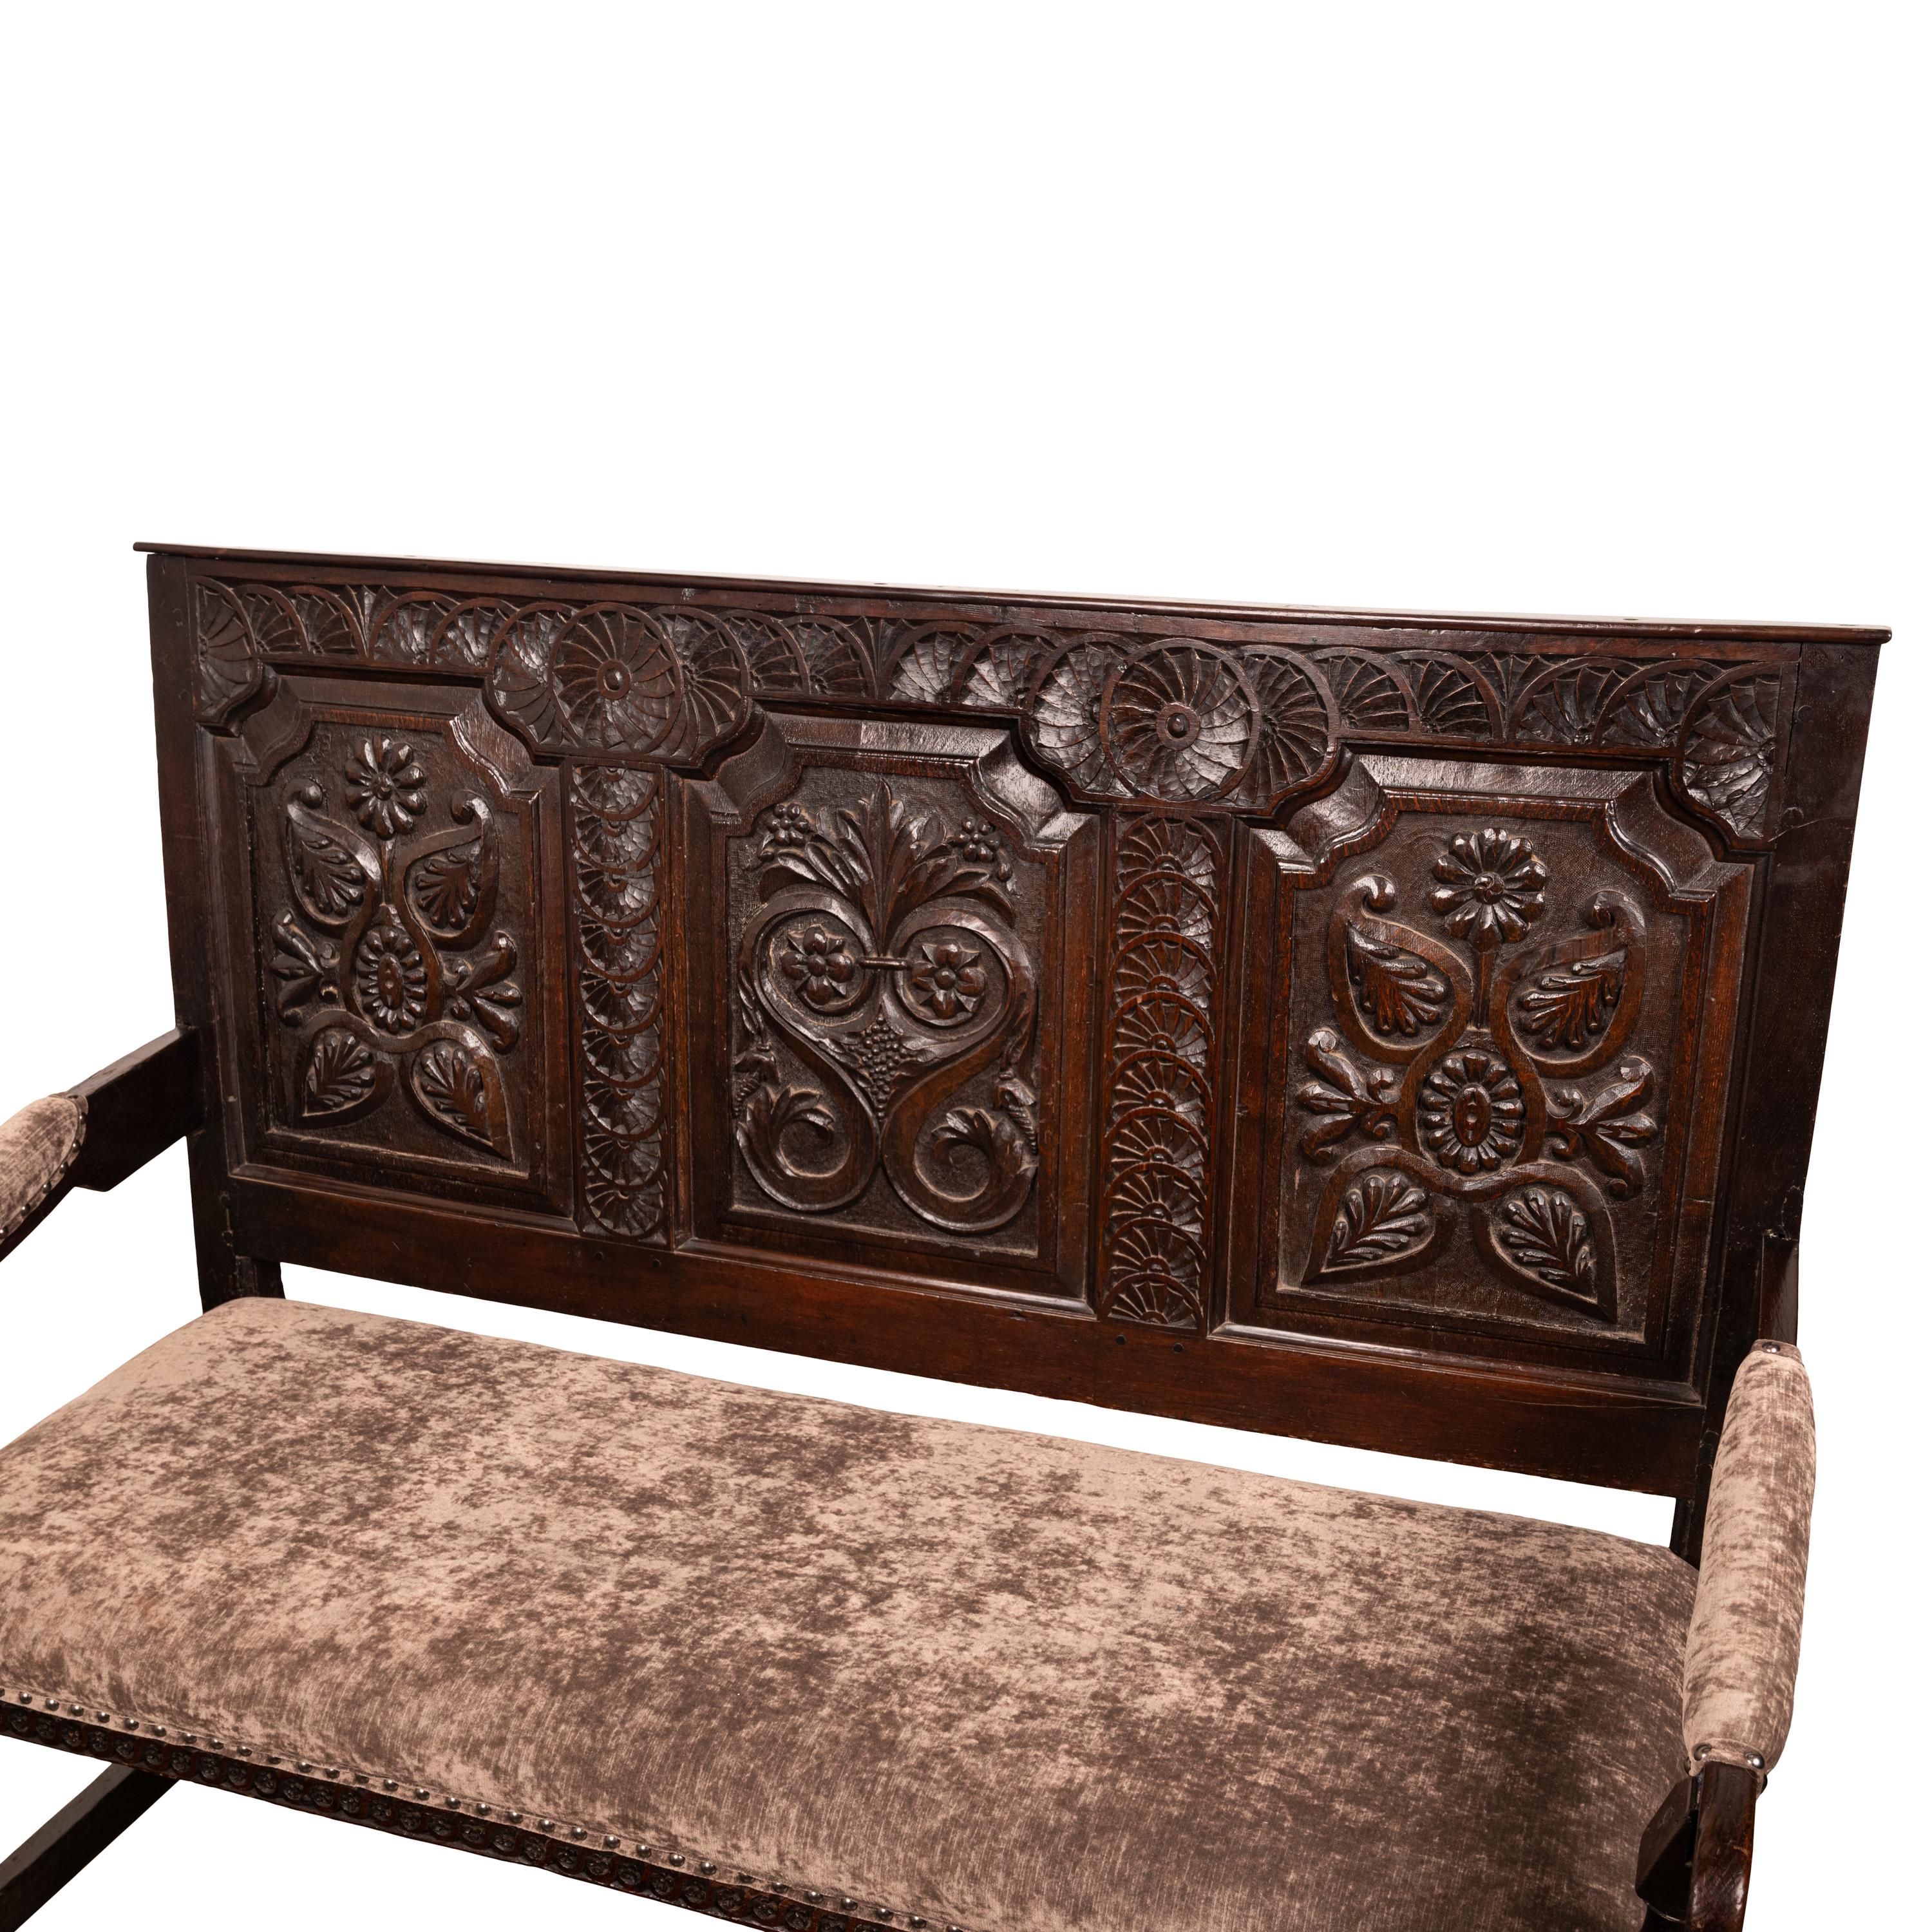 Antique English 17th Century King Charles II Carved Oak Settle Sofa Bench 1680 For Sale 7